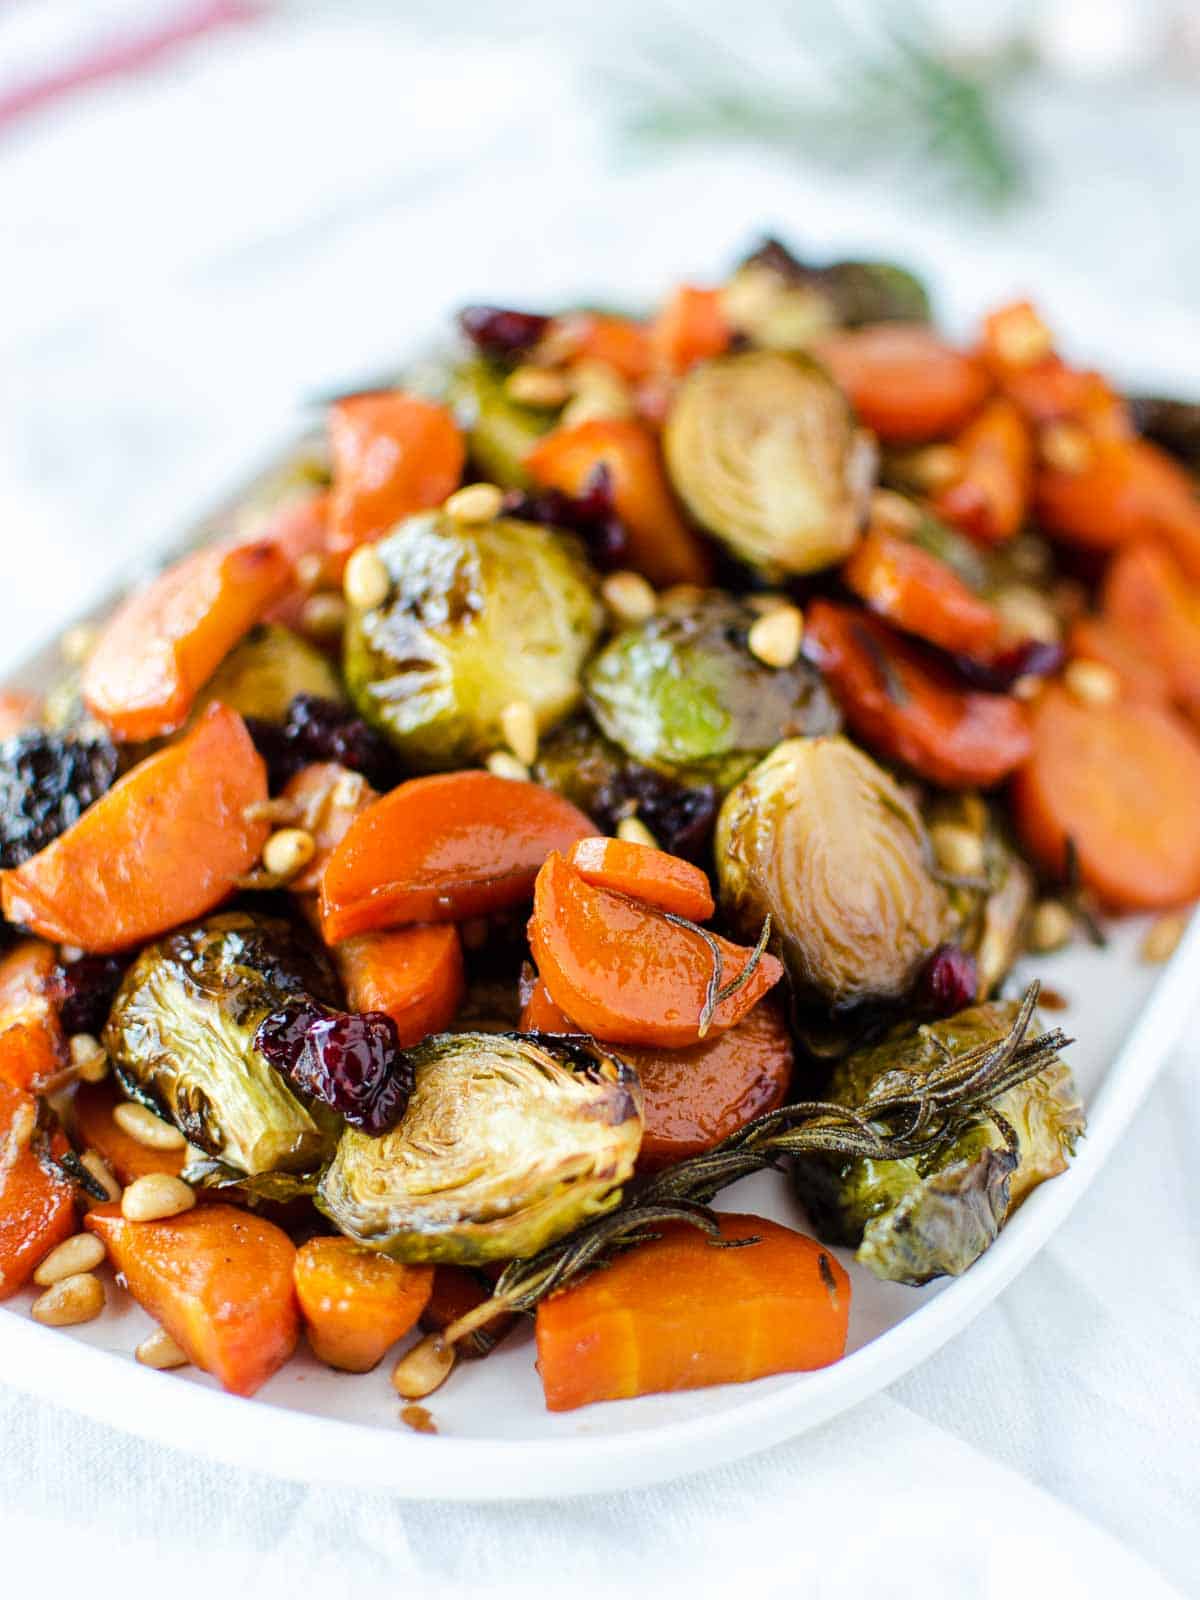 roasted carrots and brussels sprouts on white oblong plate.